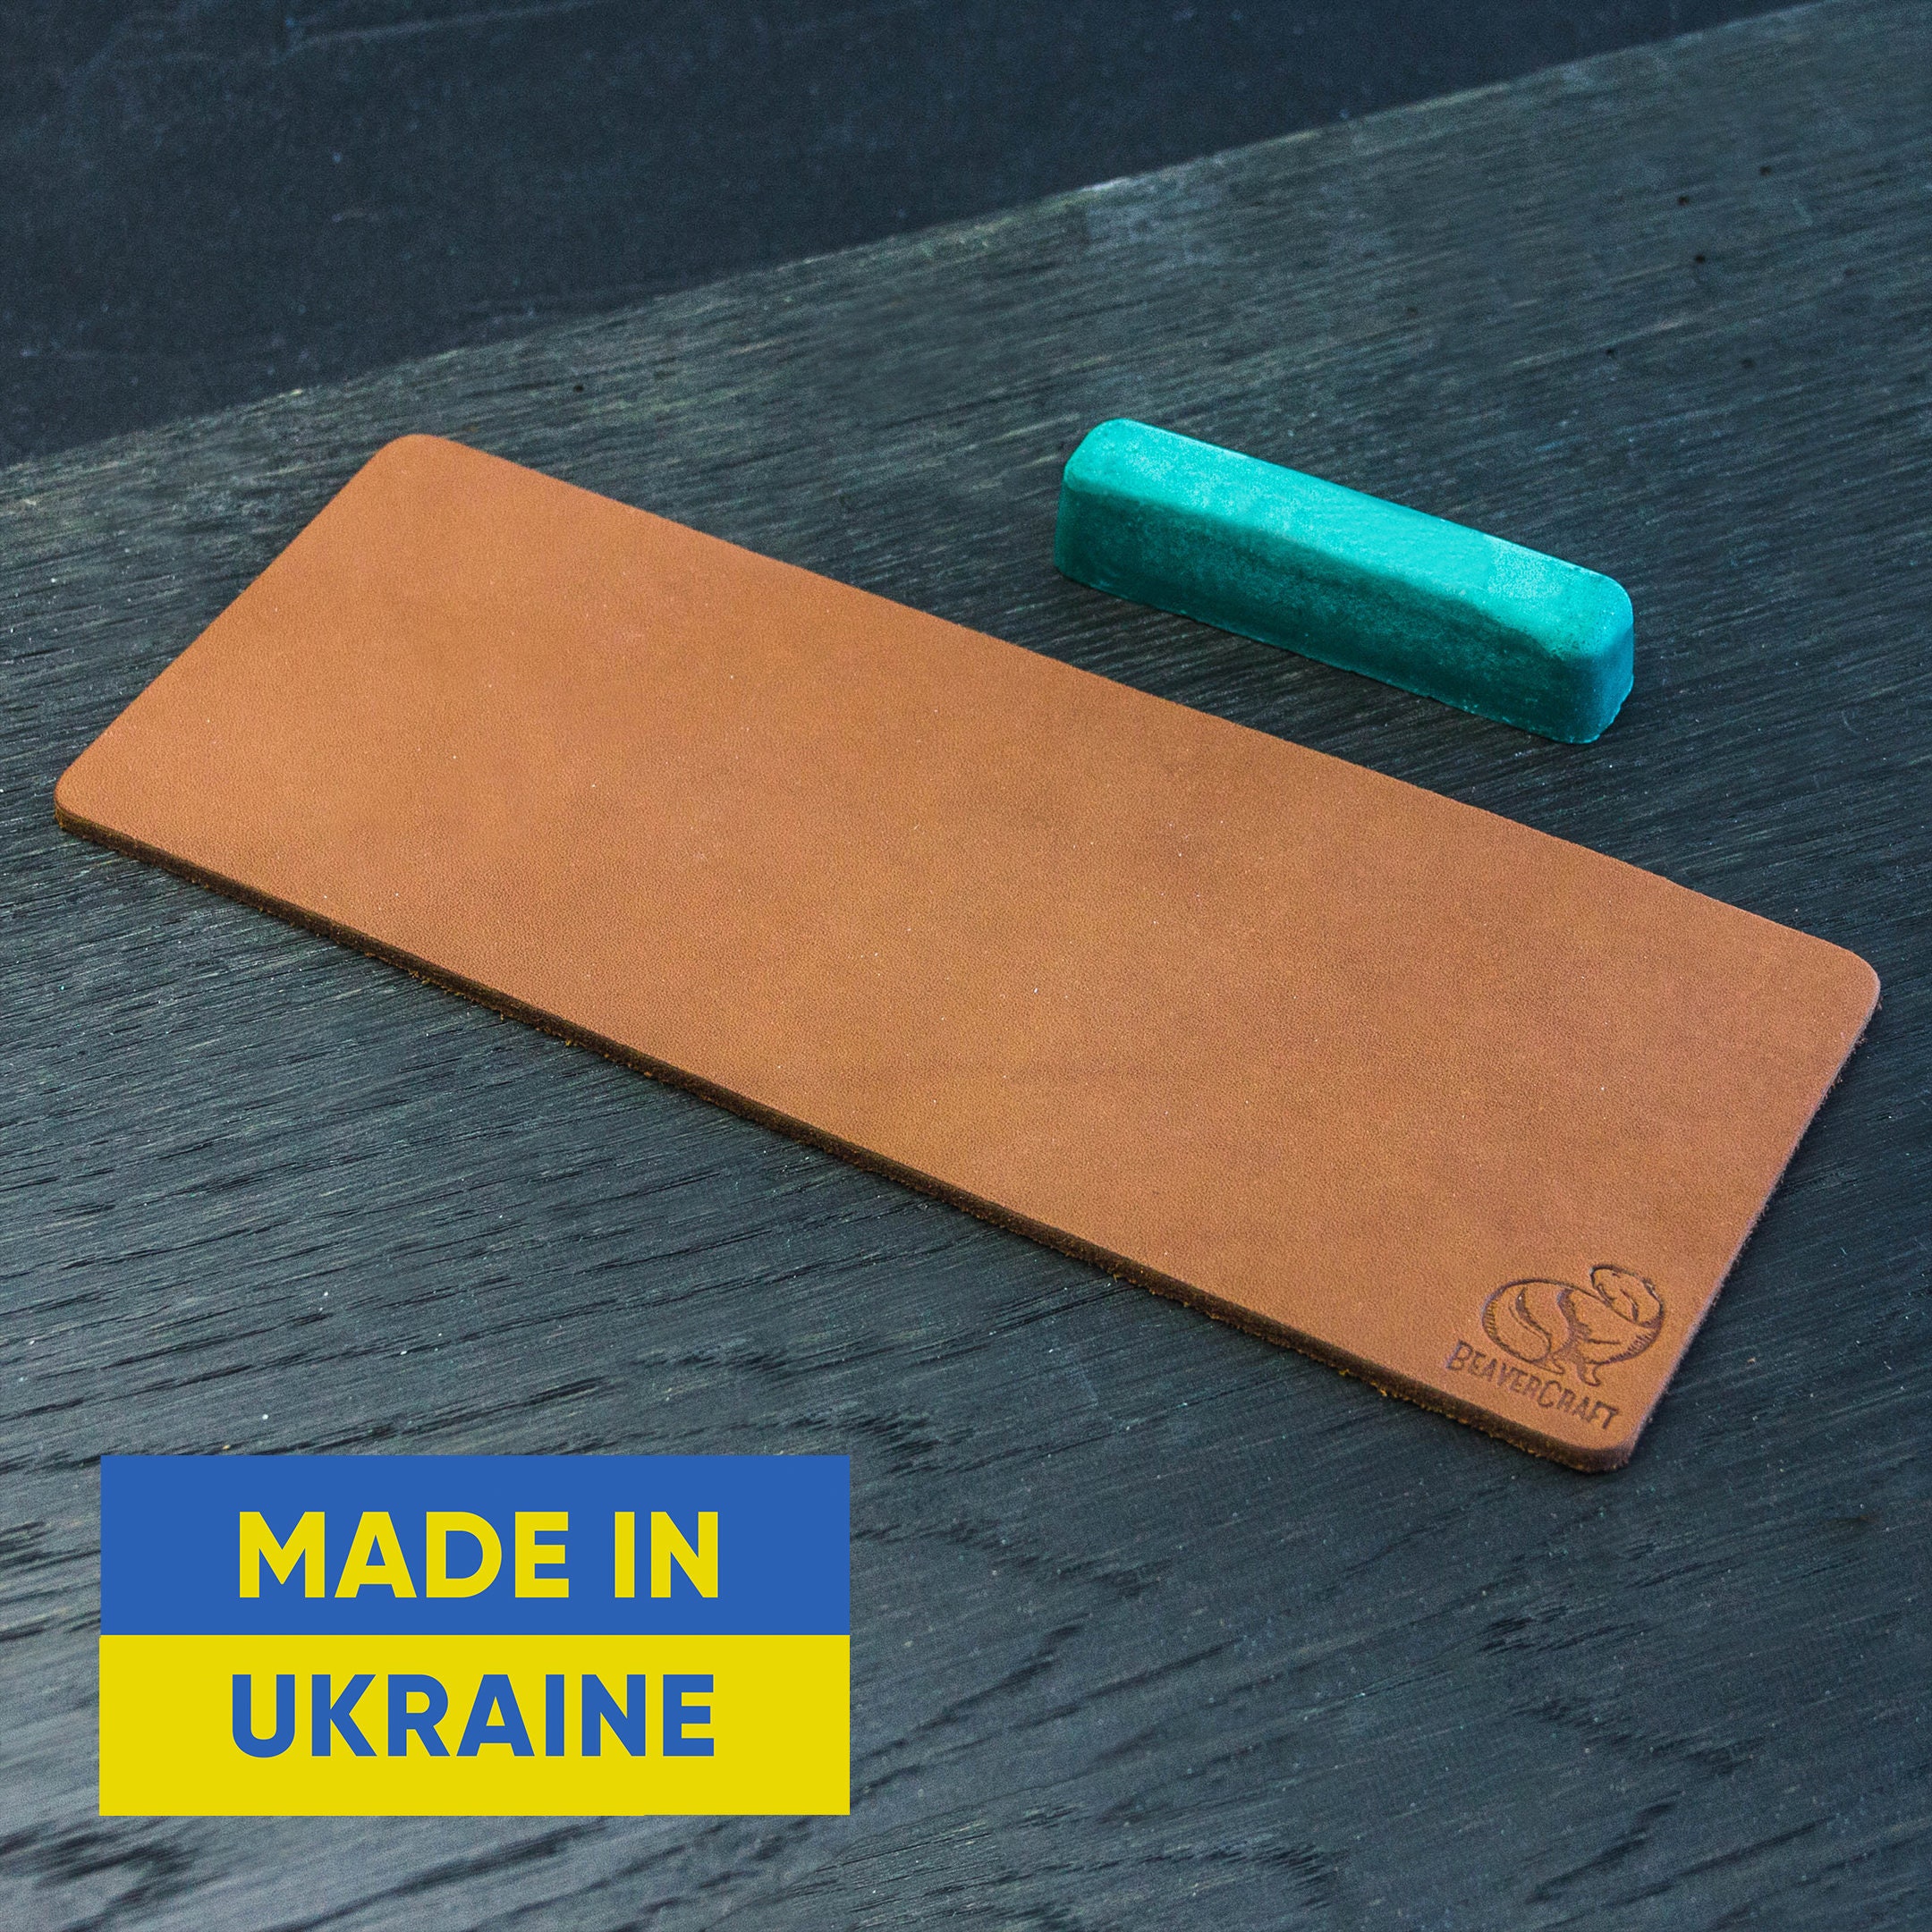 All You Need to Know About Strops, Part 1: Tough Leather from Ukraine